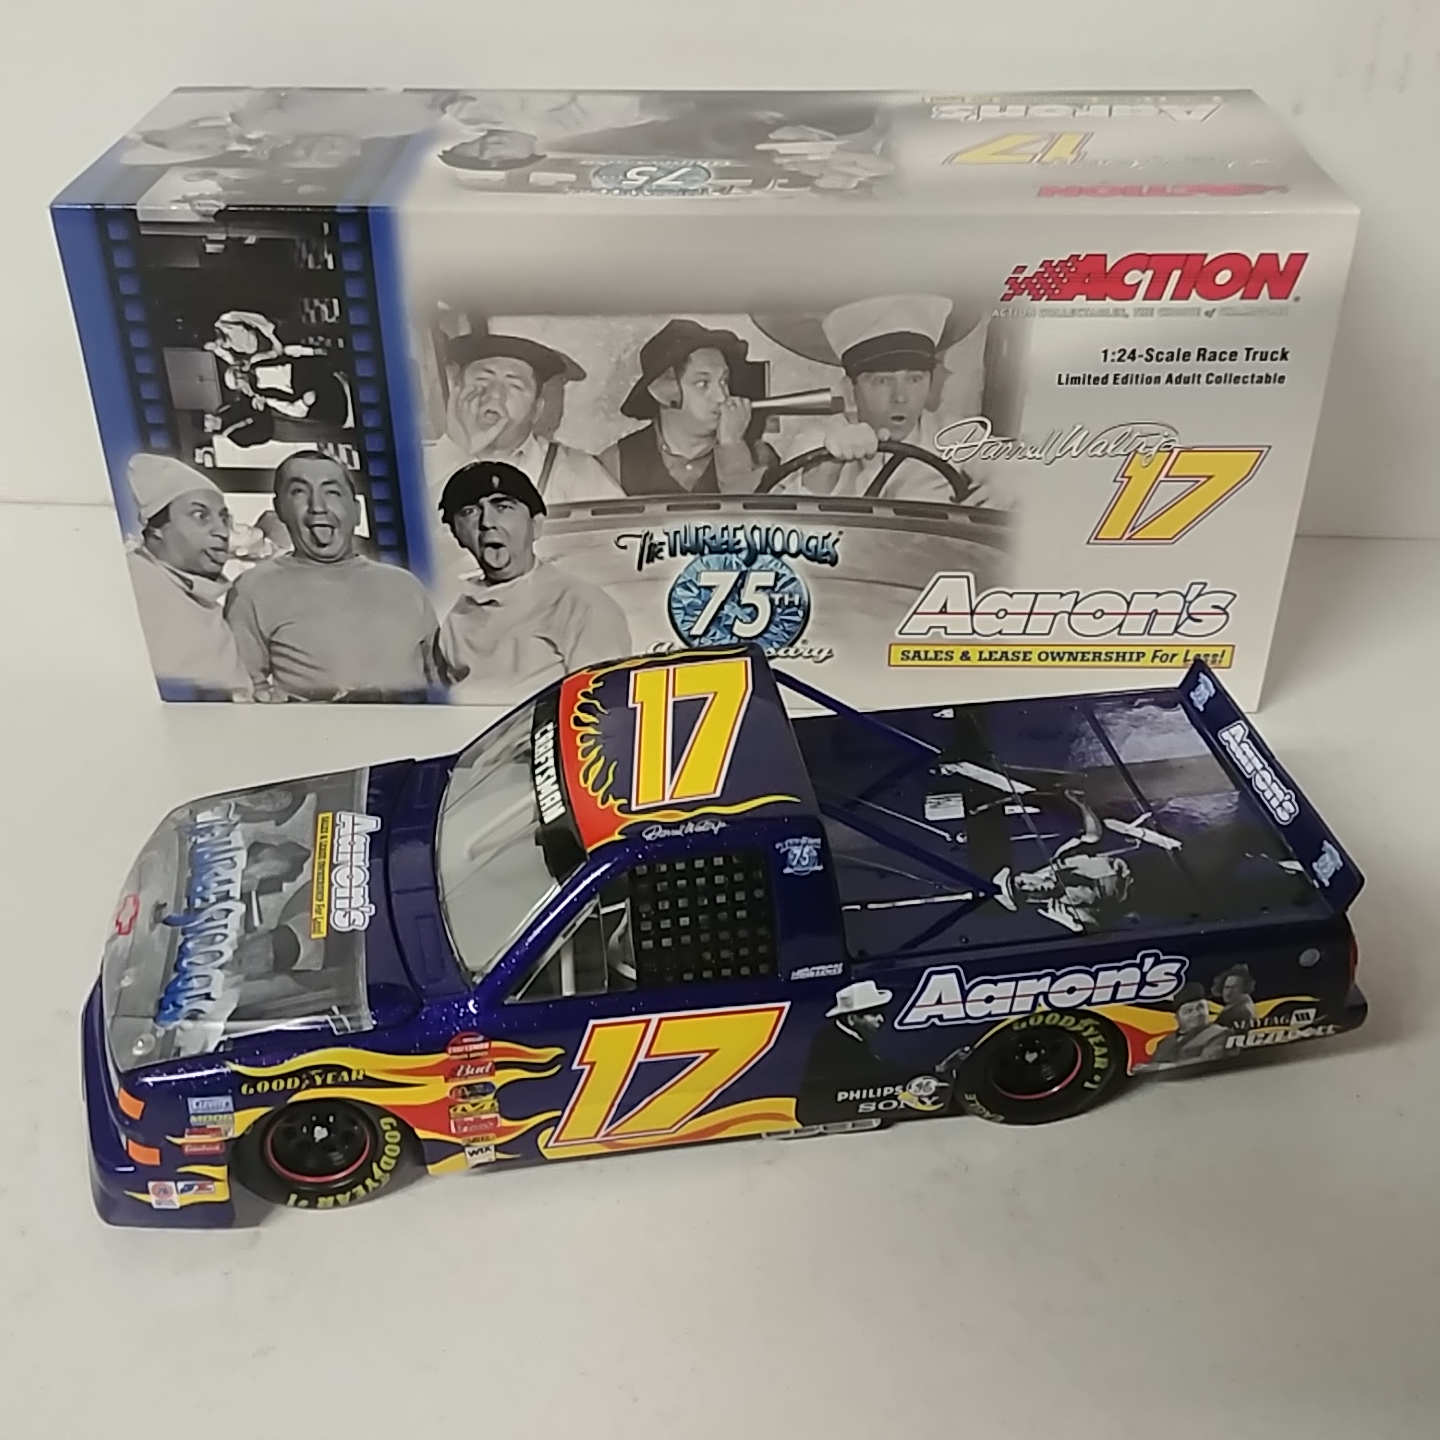 2003 Darrell Waltrip 1/24th Aaron's "The Three Stooges" Chevy Race Truck